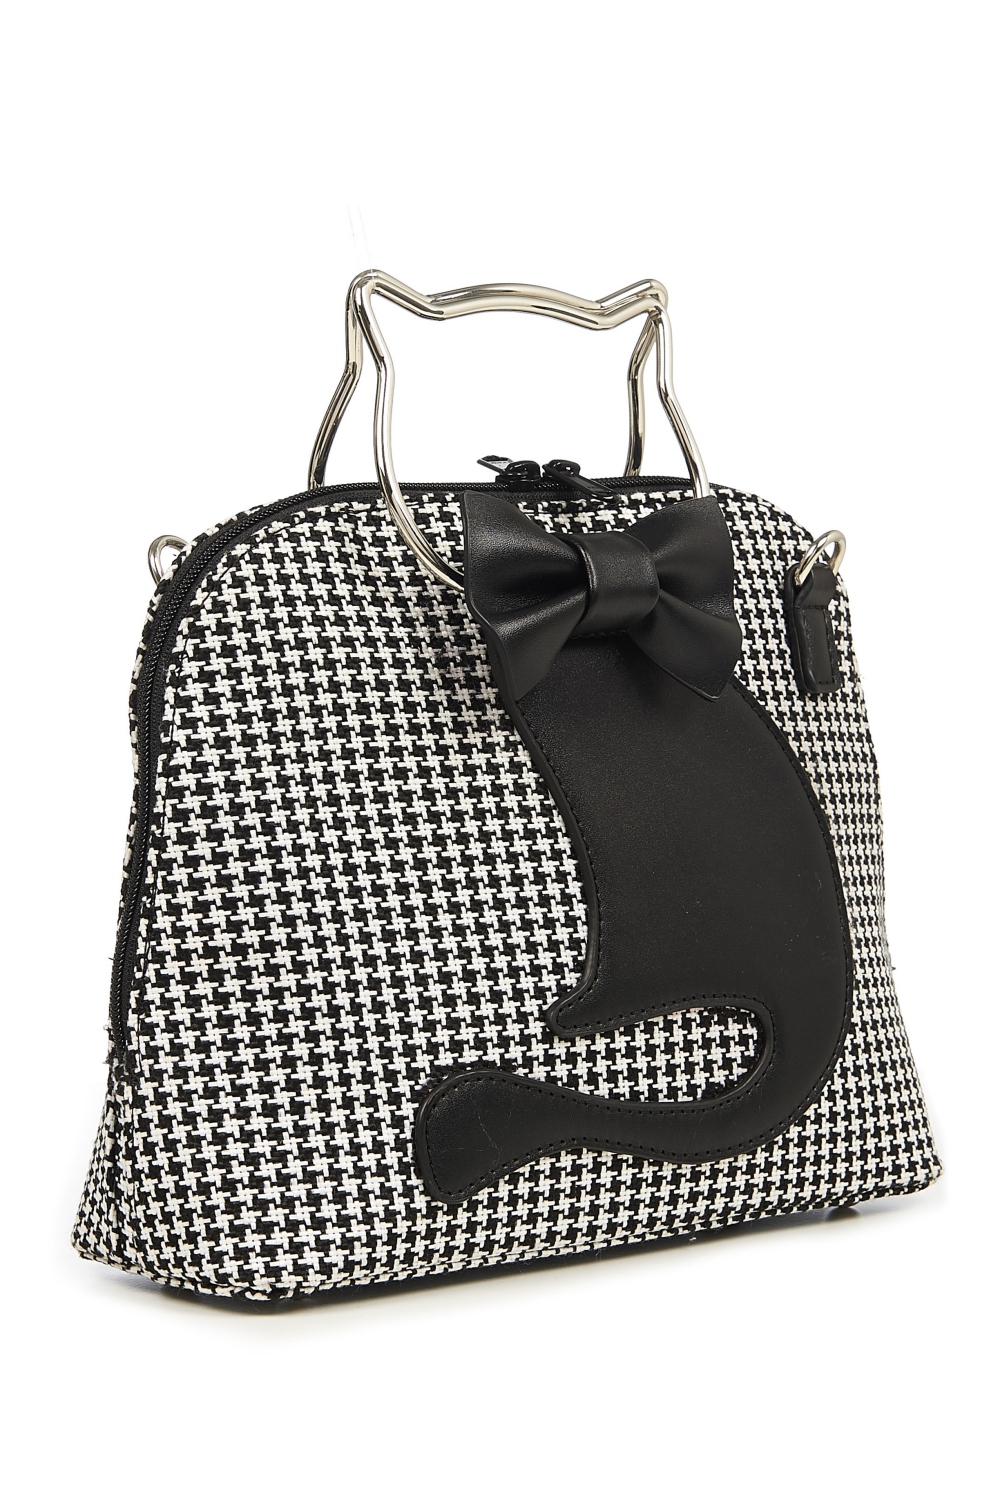 Banned Retro 50s Dixie Houndstooth Cat Bag